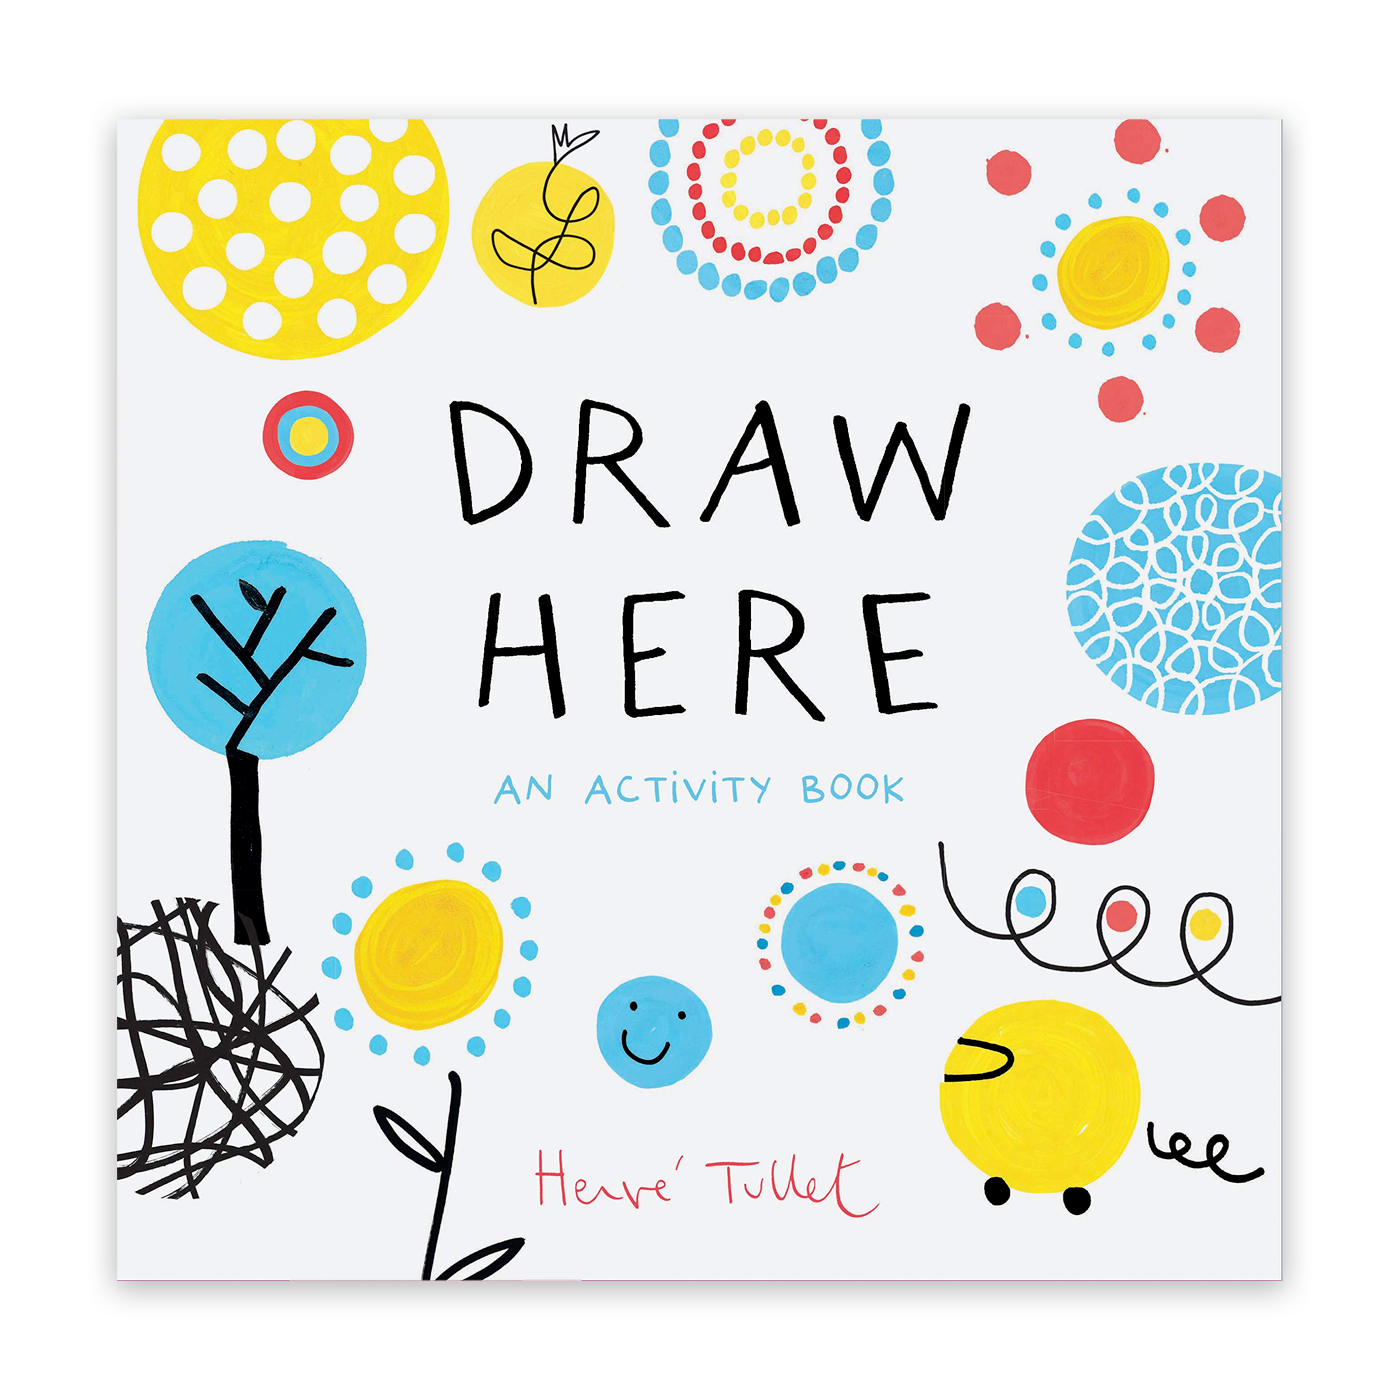  Draw Here